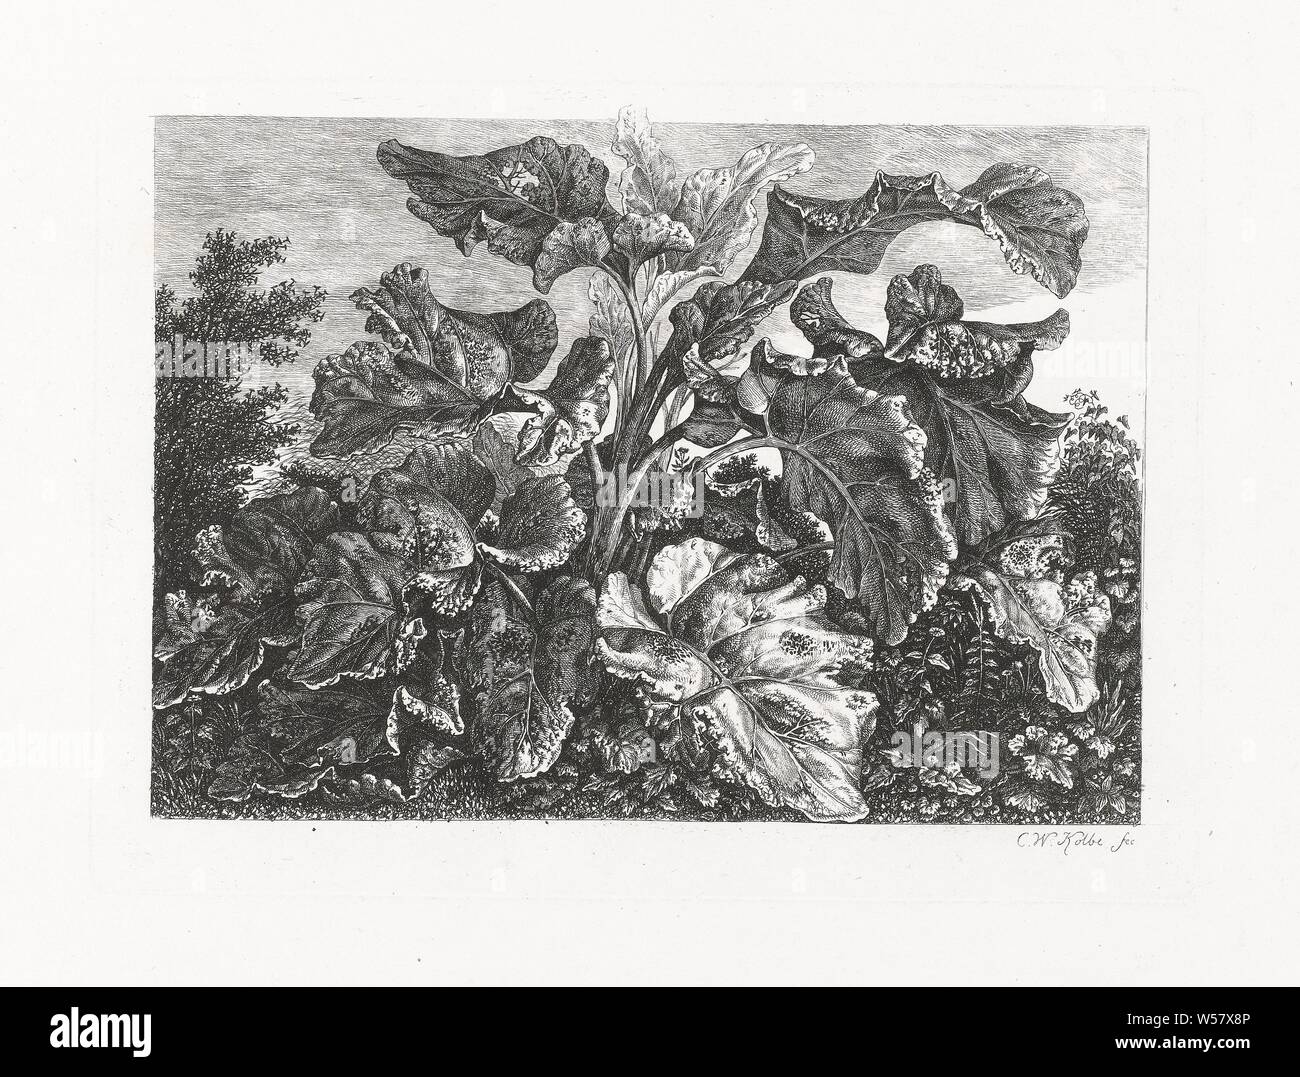 Leaves of the big burdock, Possibly a study of the plant known under the Latin name 'Arctium lappa', lower plants, Carl Wilhelm Kolbe (I) (mentioned on object), 1767 - 1835, paper, etching, h 200 mm × w 271 mm Stock Photo